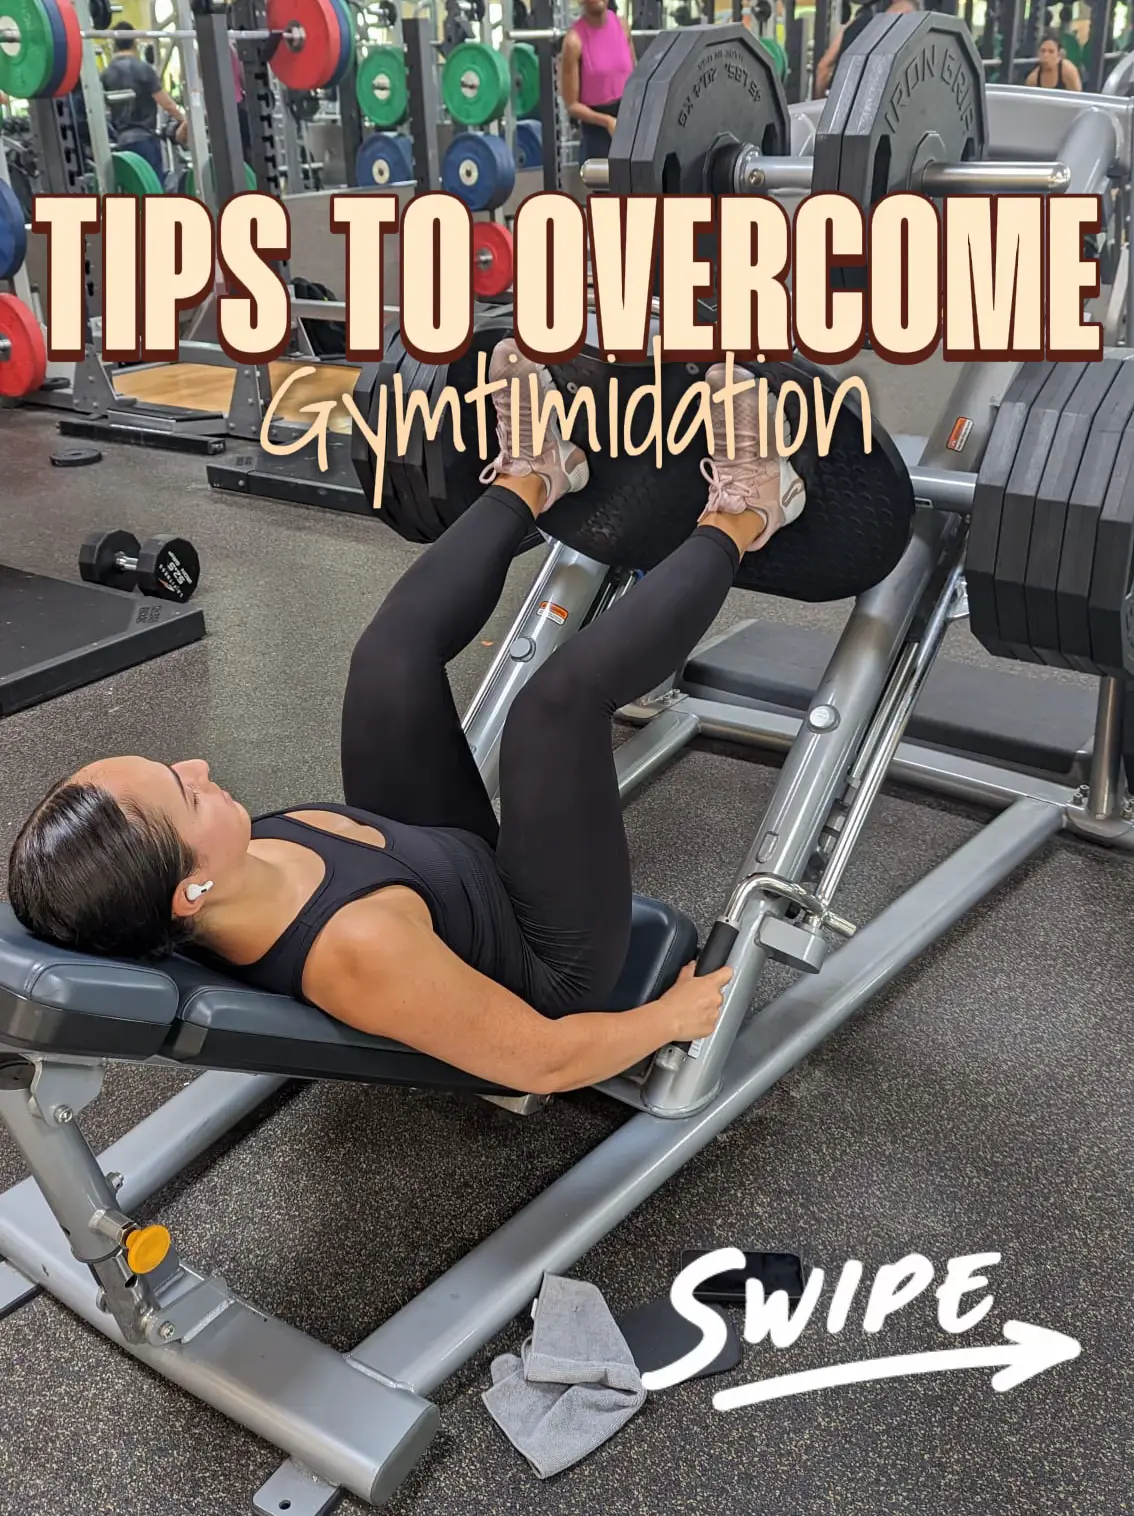 GYMTIMIDATION: TIPS FOR OVERCOMING IT, Gallery posted by alwayseatingnyc